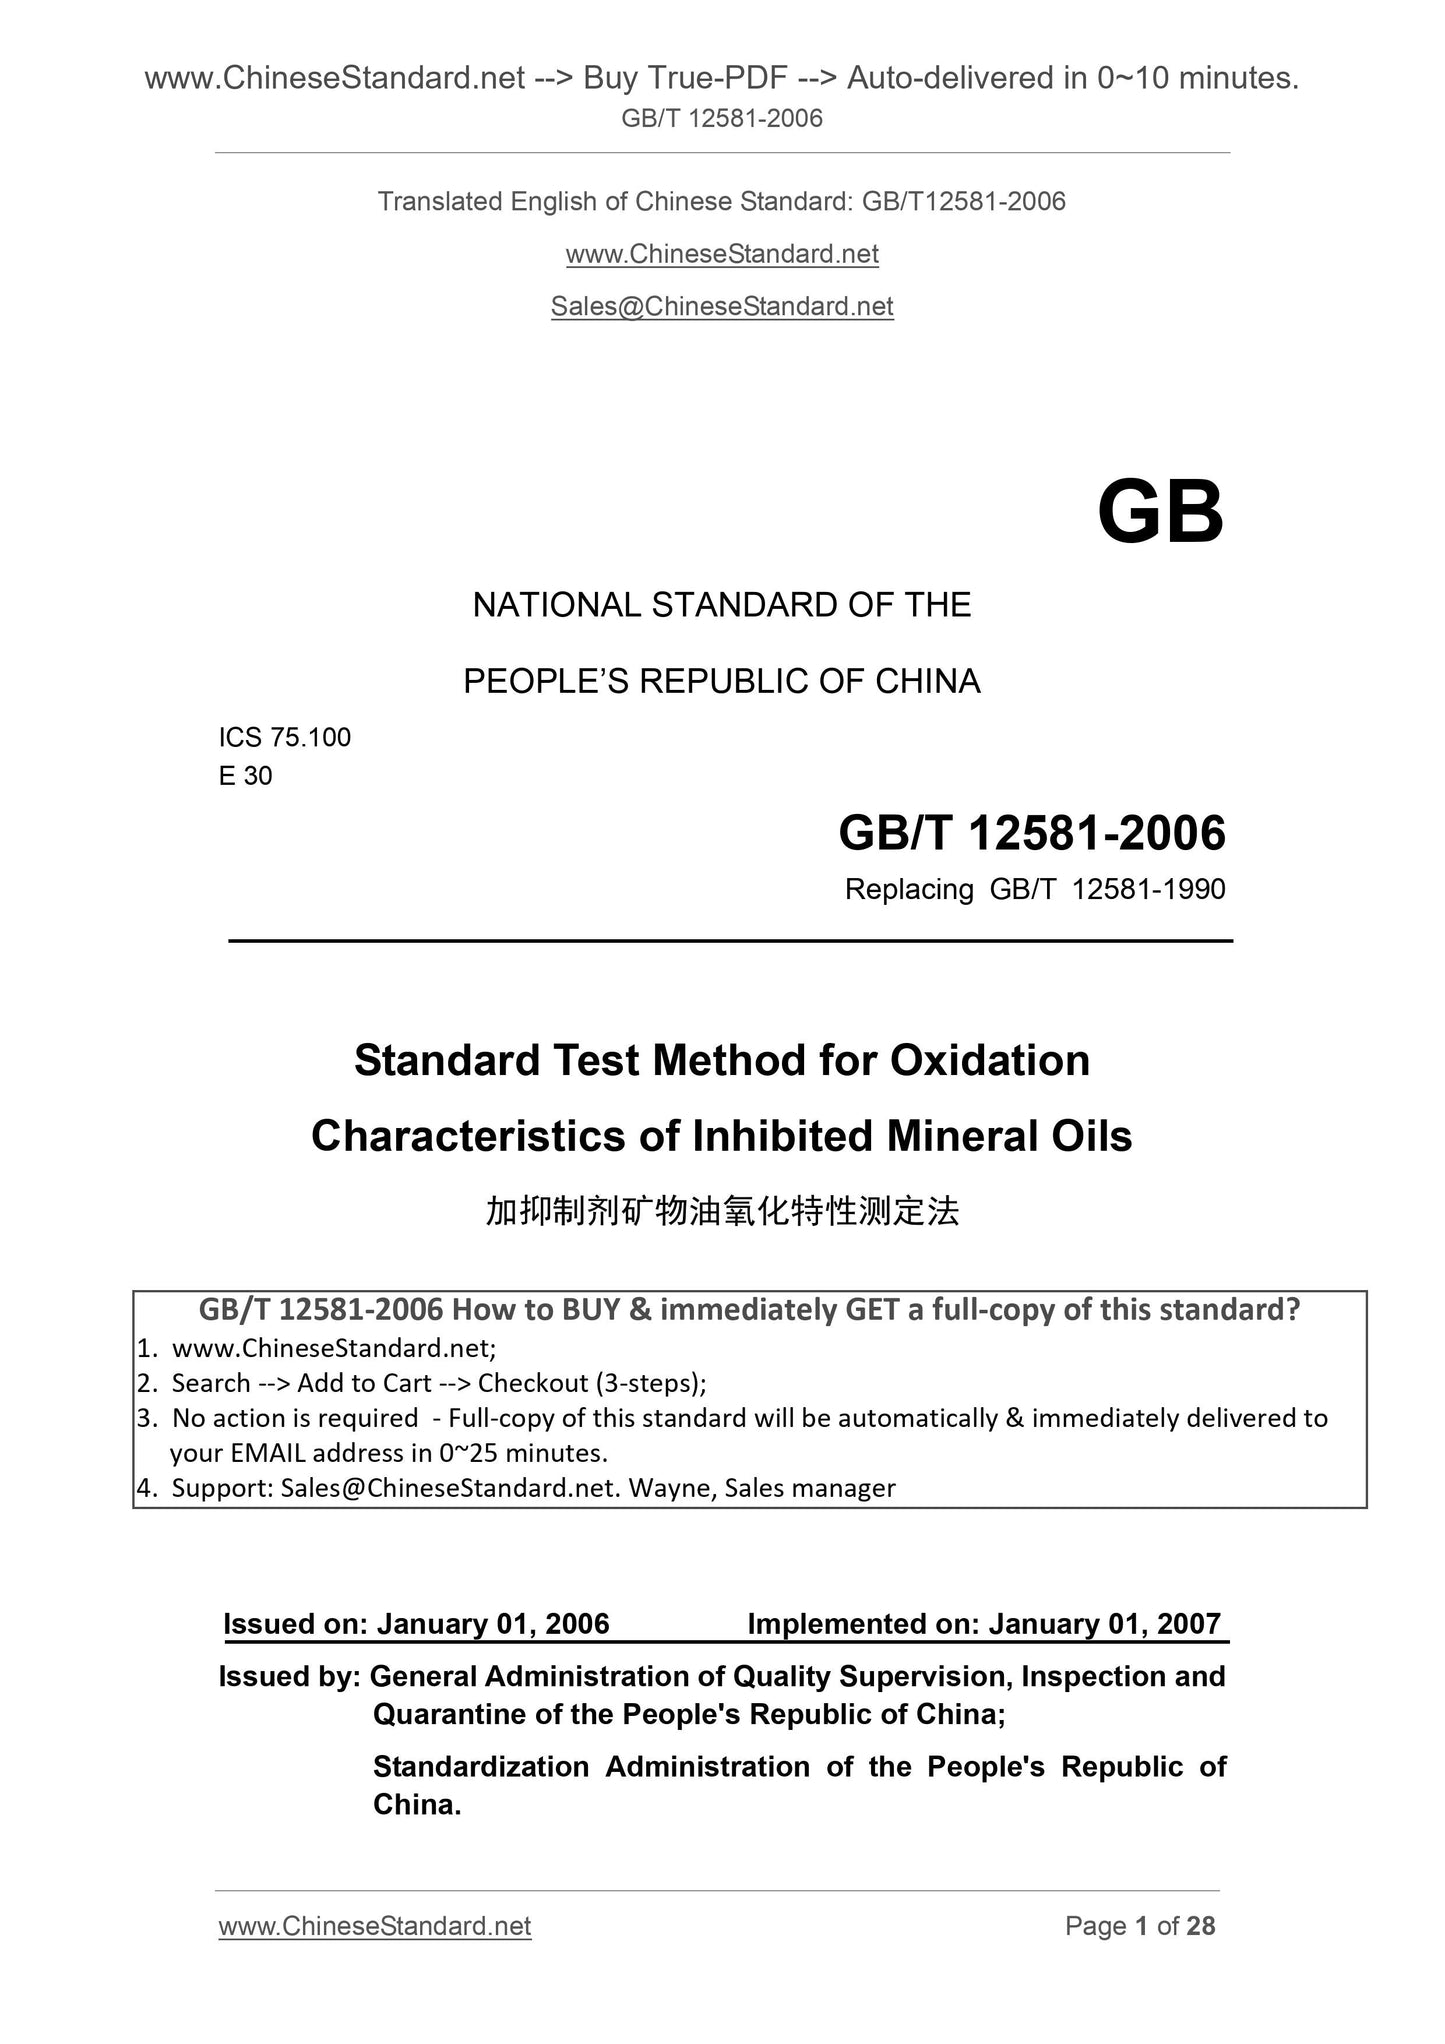 GB/T 12581-2006 Page 1